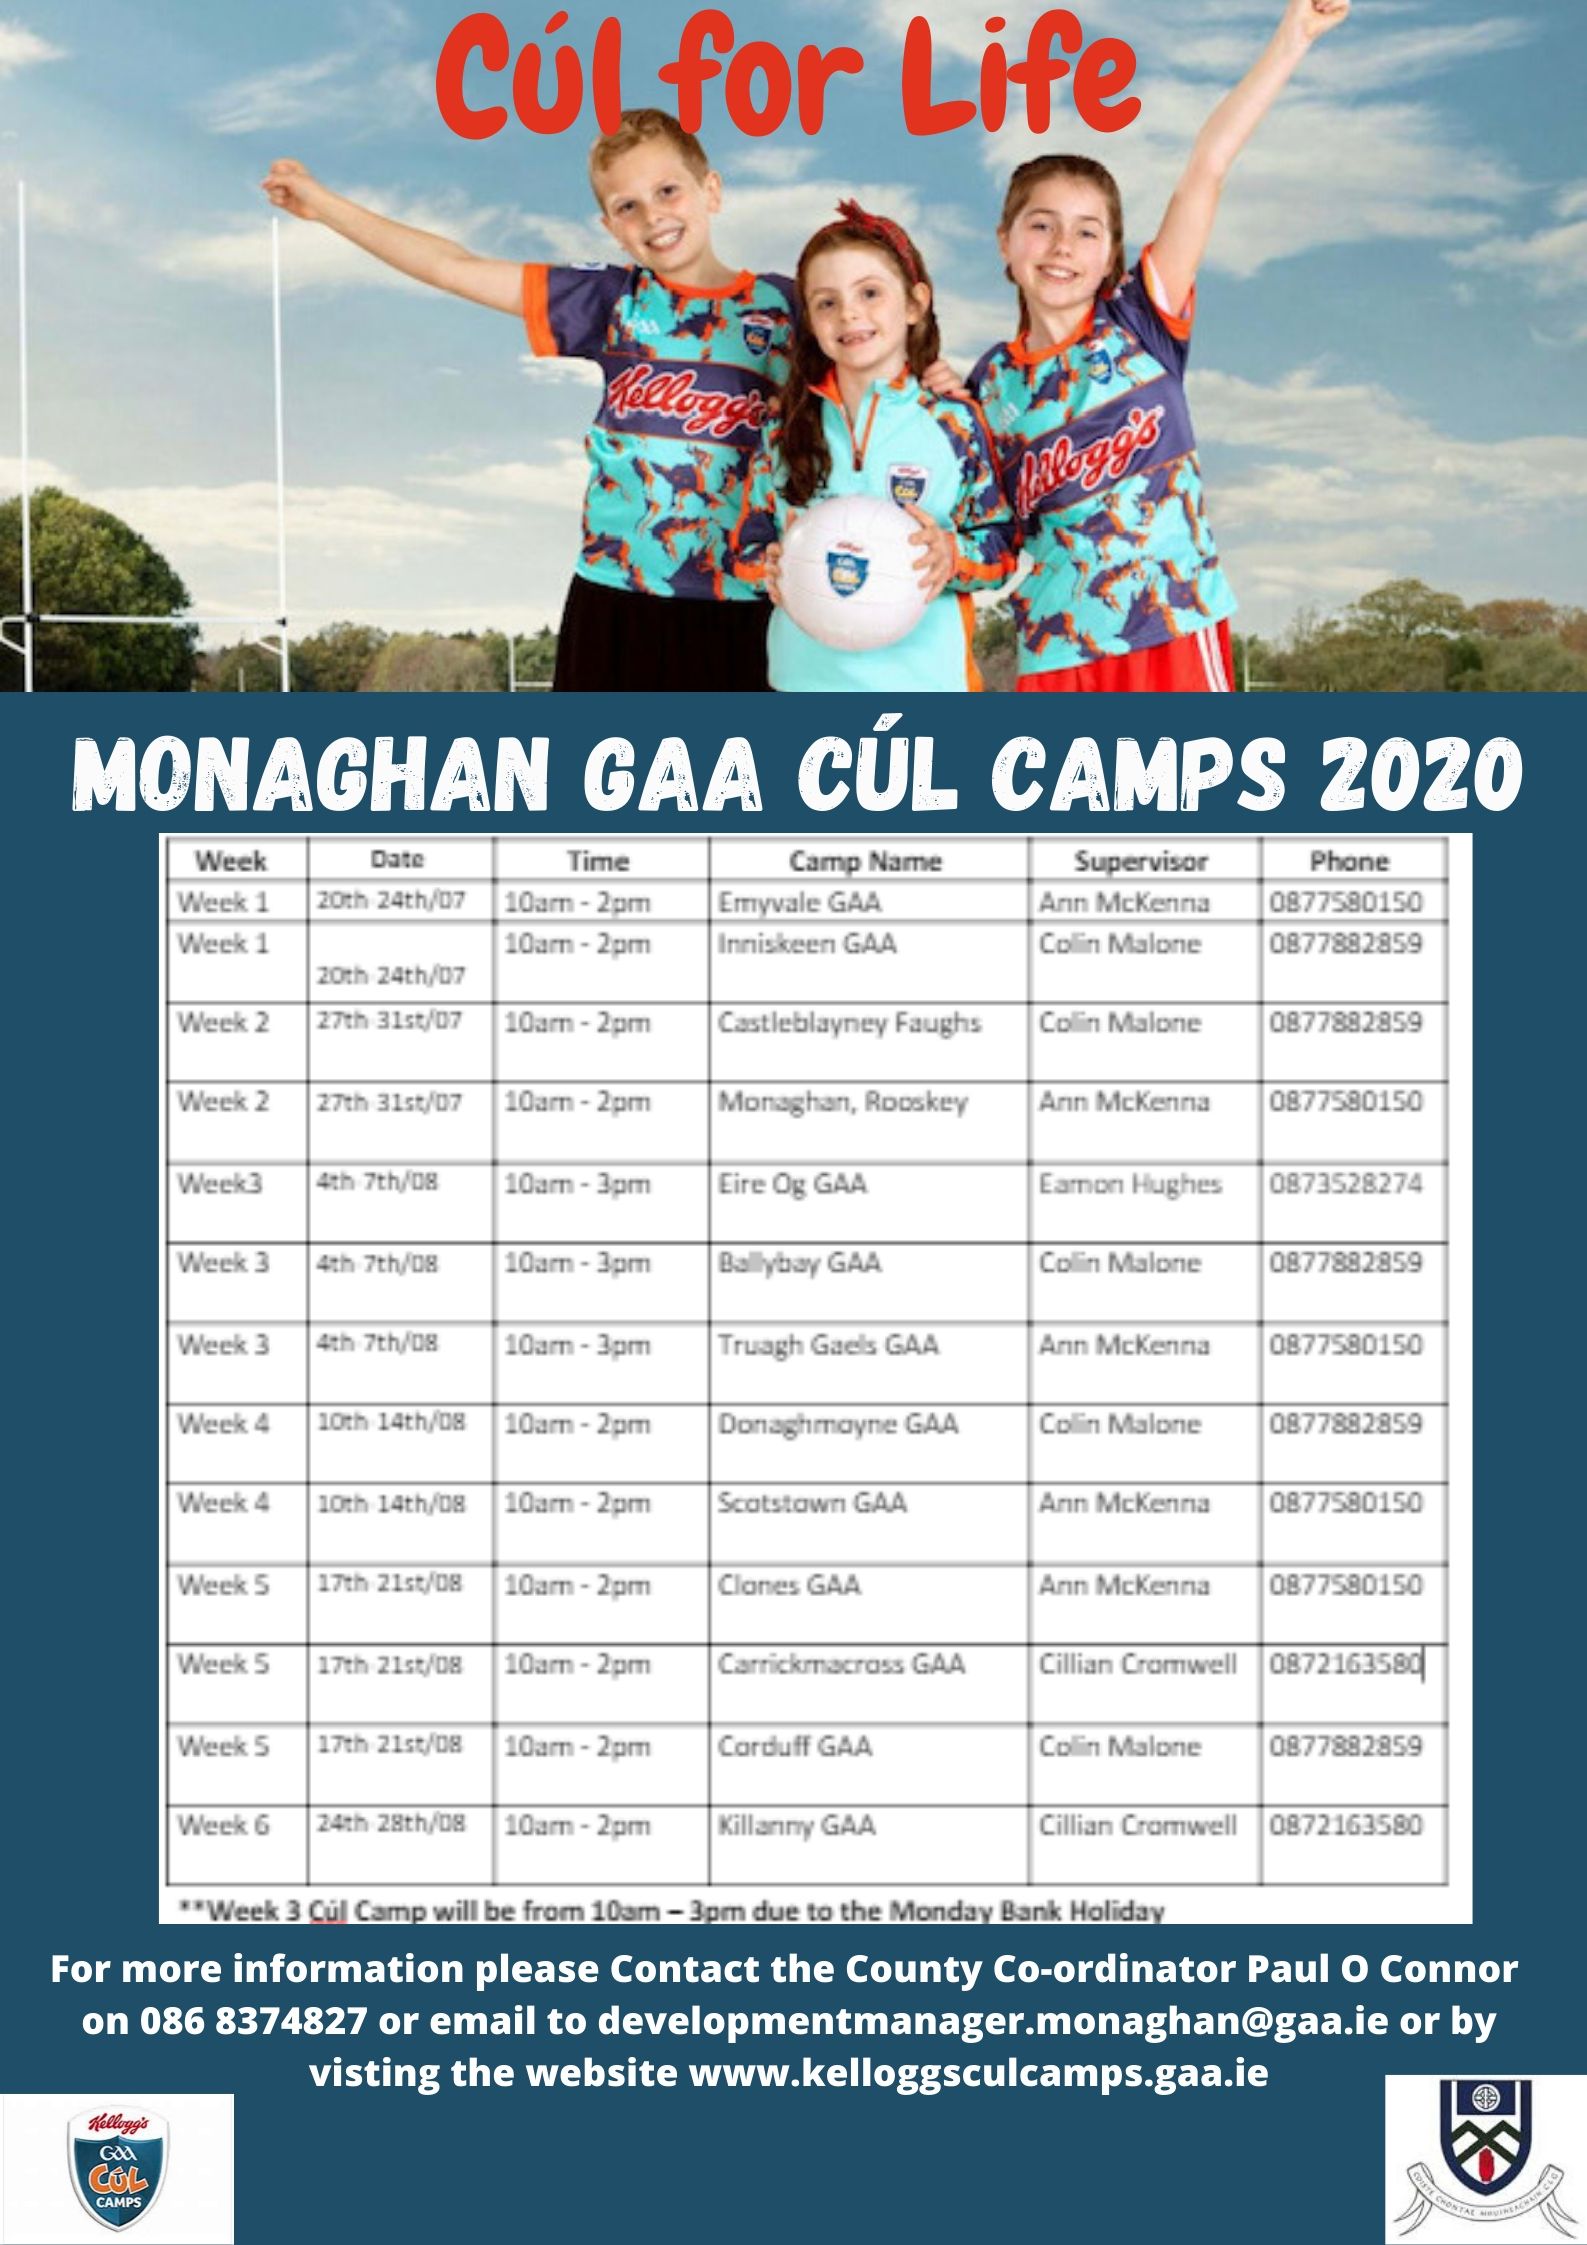 Advice for Parents / Guardians Children due to attend Monaghan Kelloggs Cul Camps….